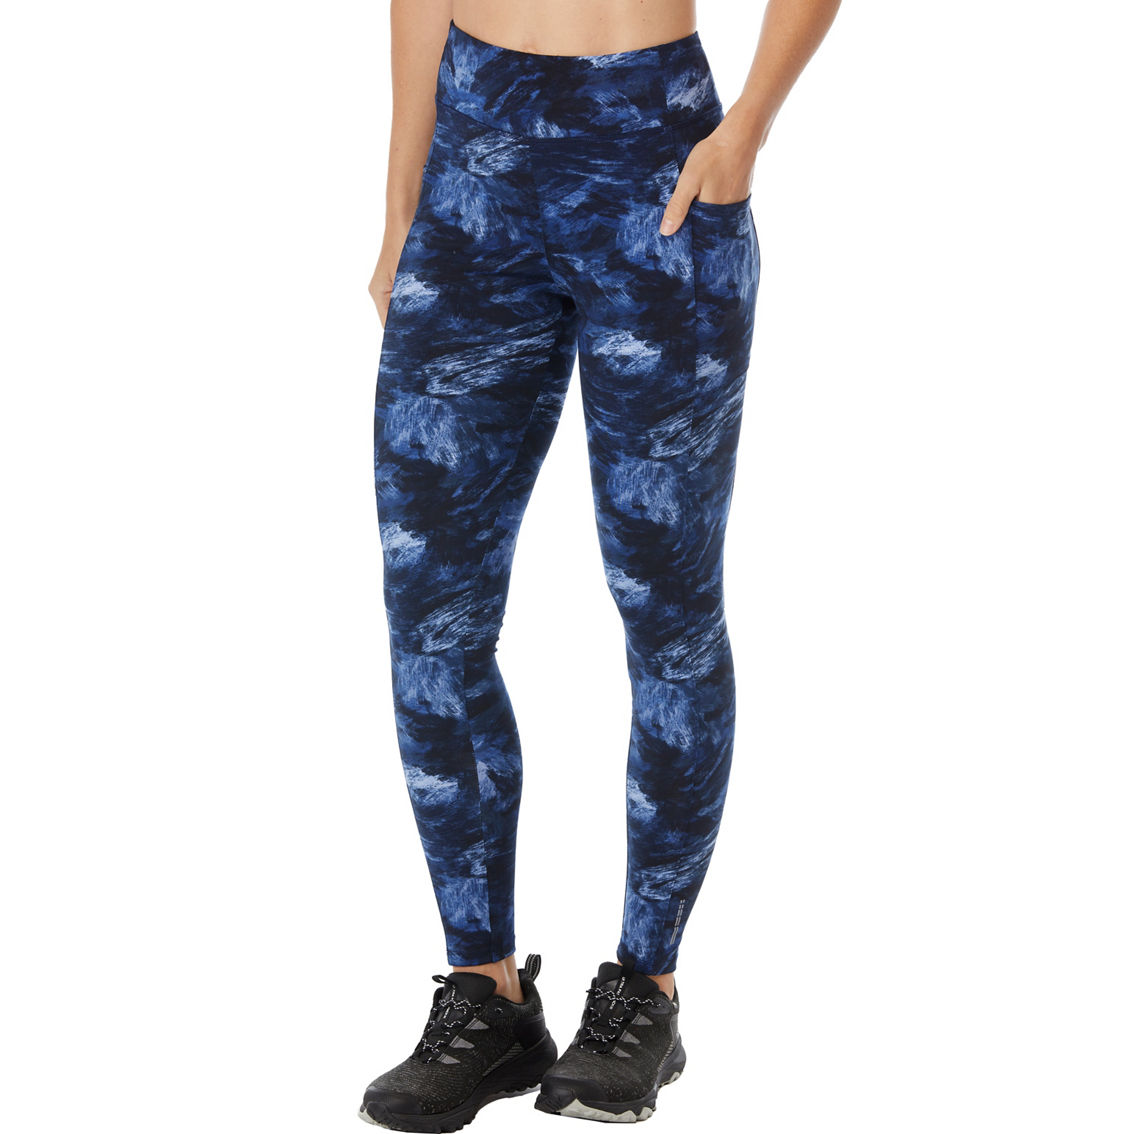 Pbx Pro Pocketed Leggings | Pants | Clothing & Accessories | Shop The ...